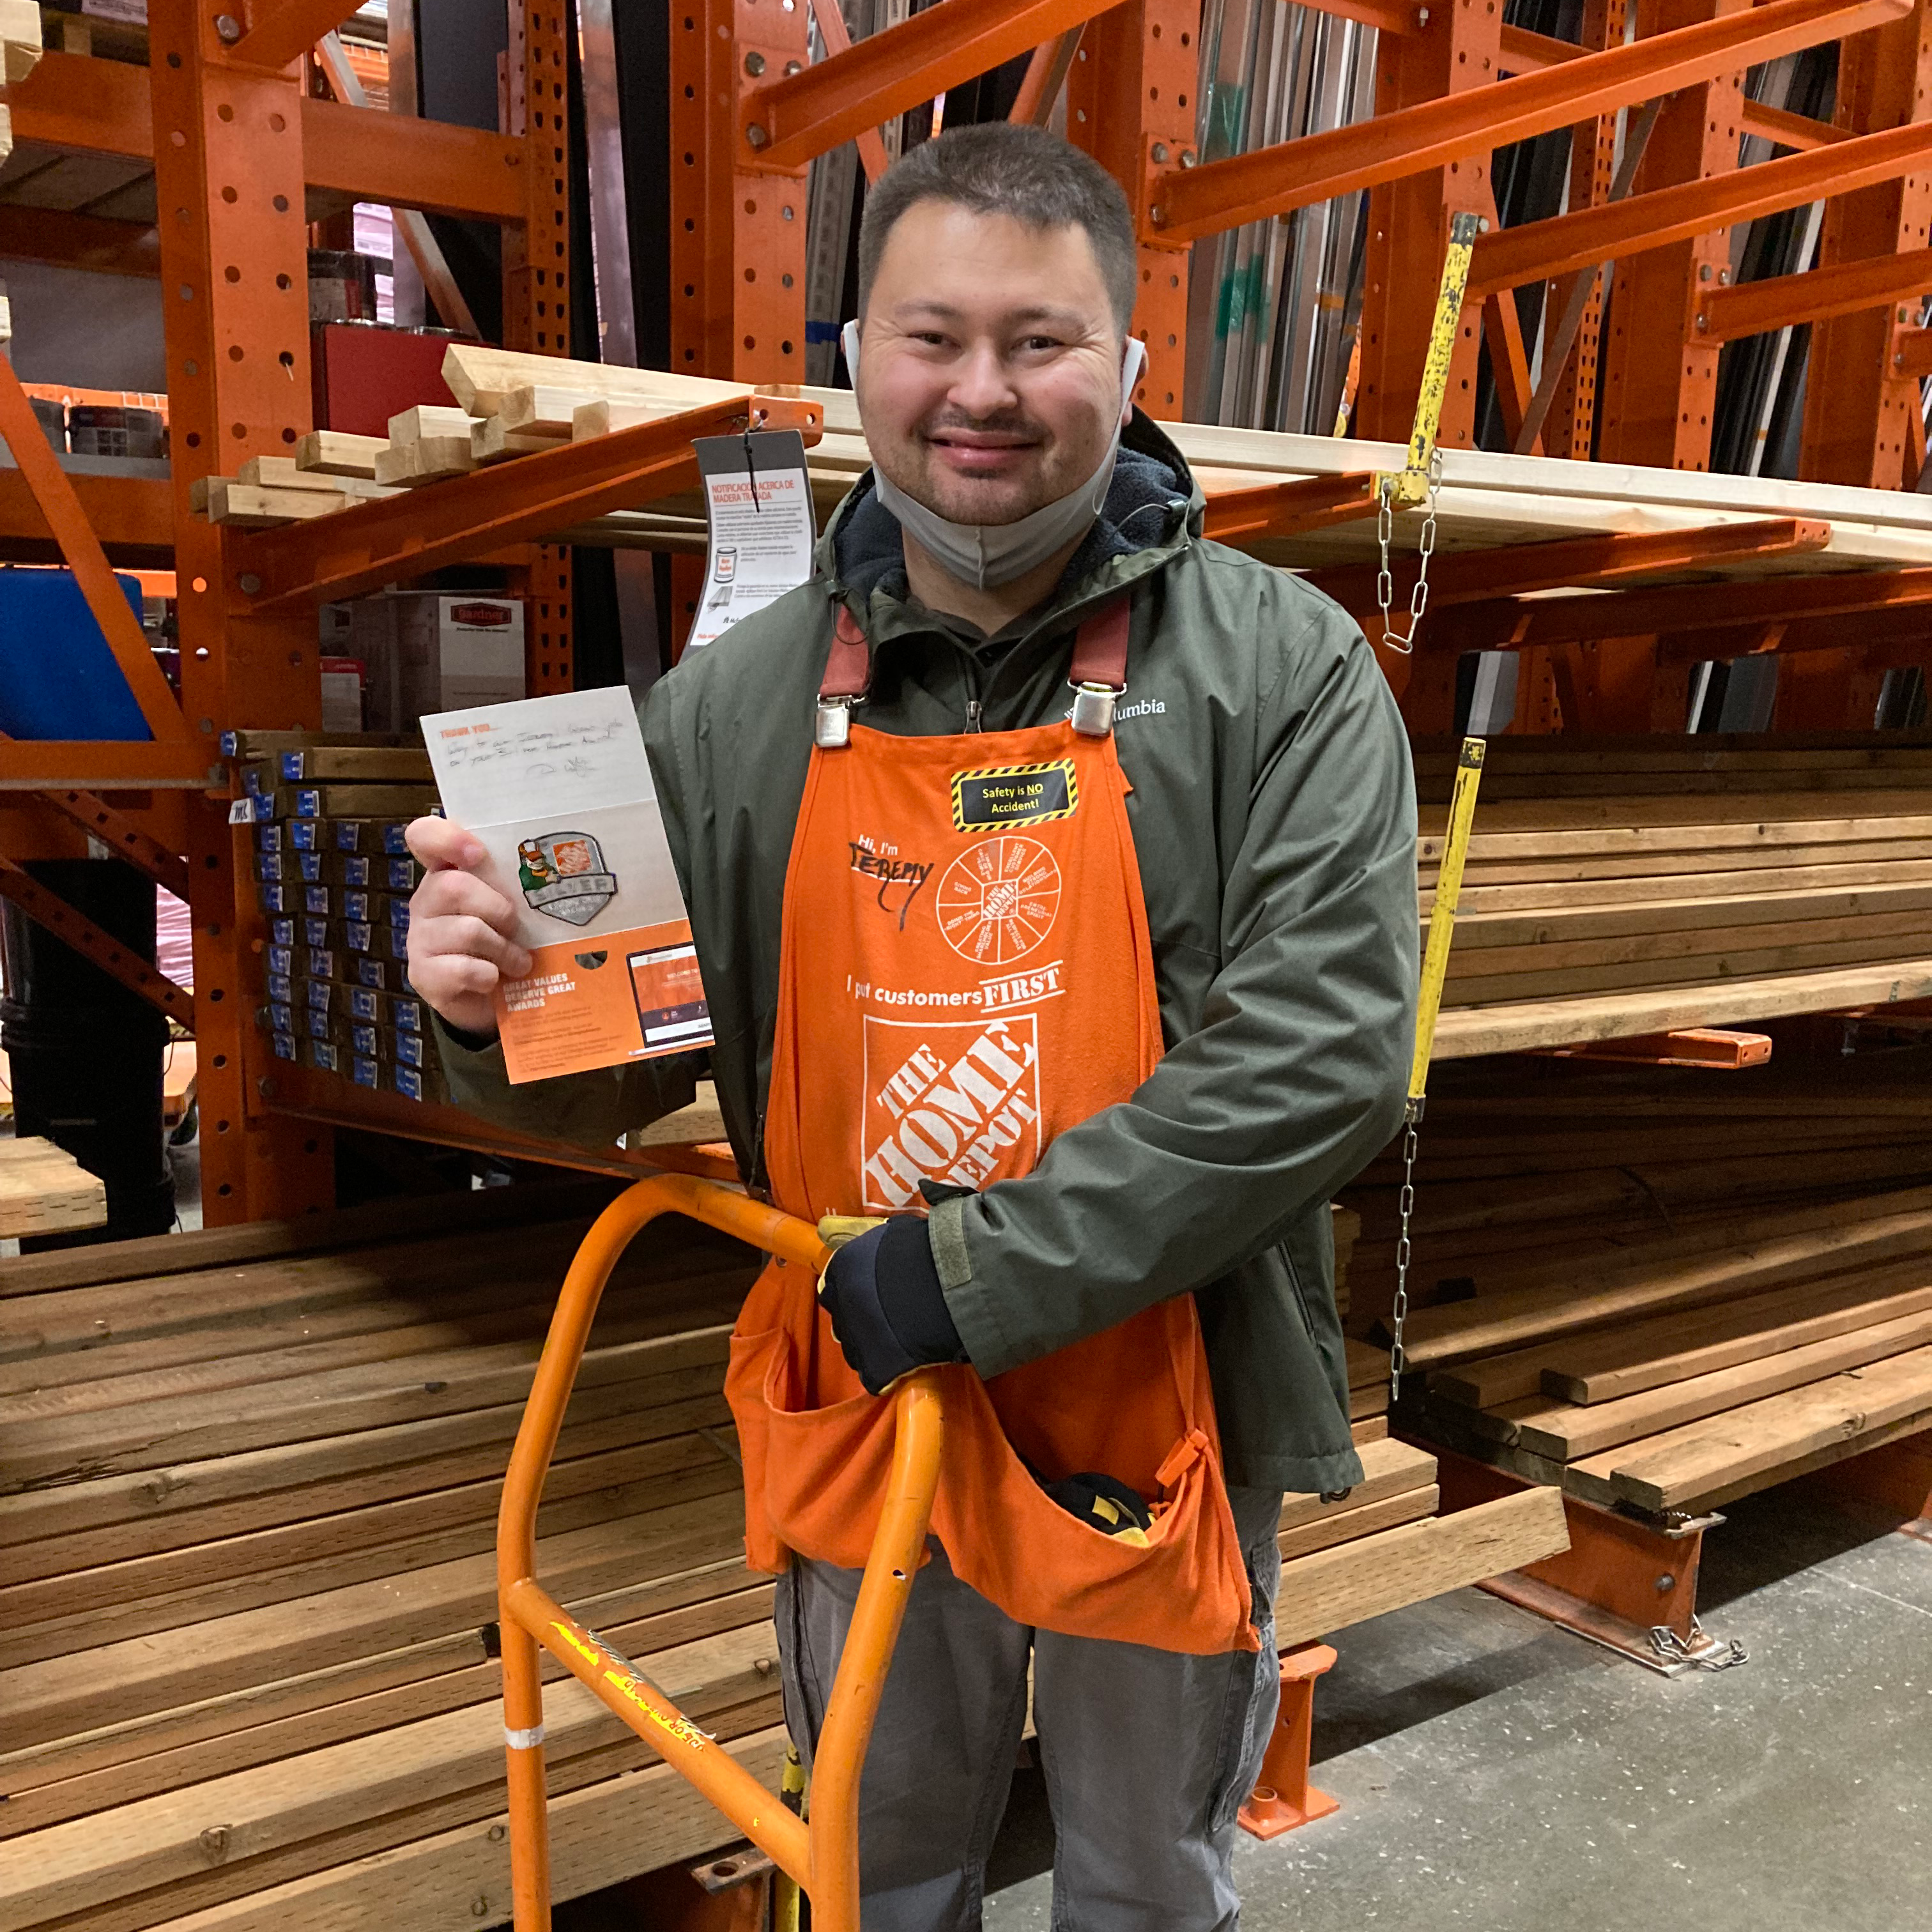 Image: Man with short brown hair wearing a Home Depot apron smiles, holding a card in one hand, his other hand on the handle of a Home Depot cart. He is standing in front of lumber.